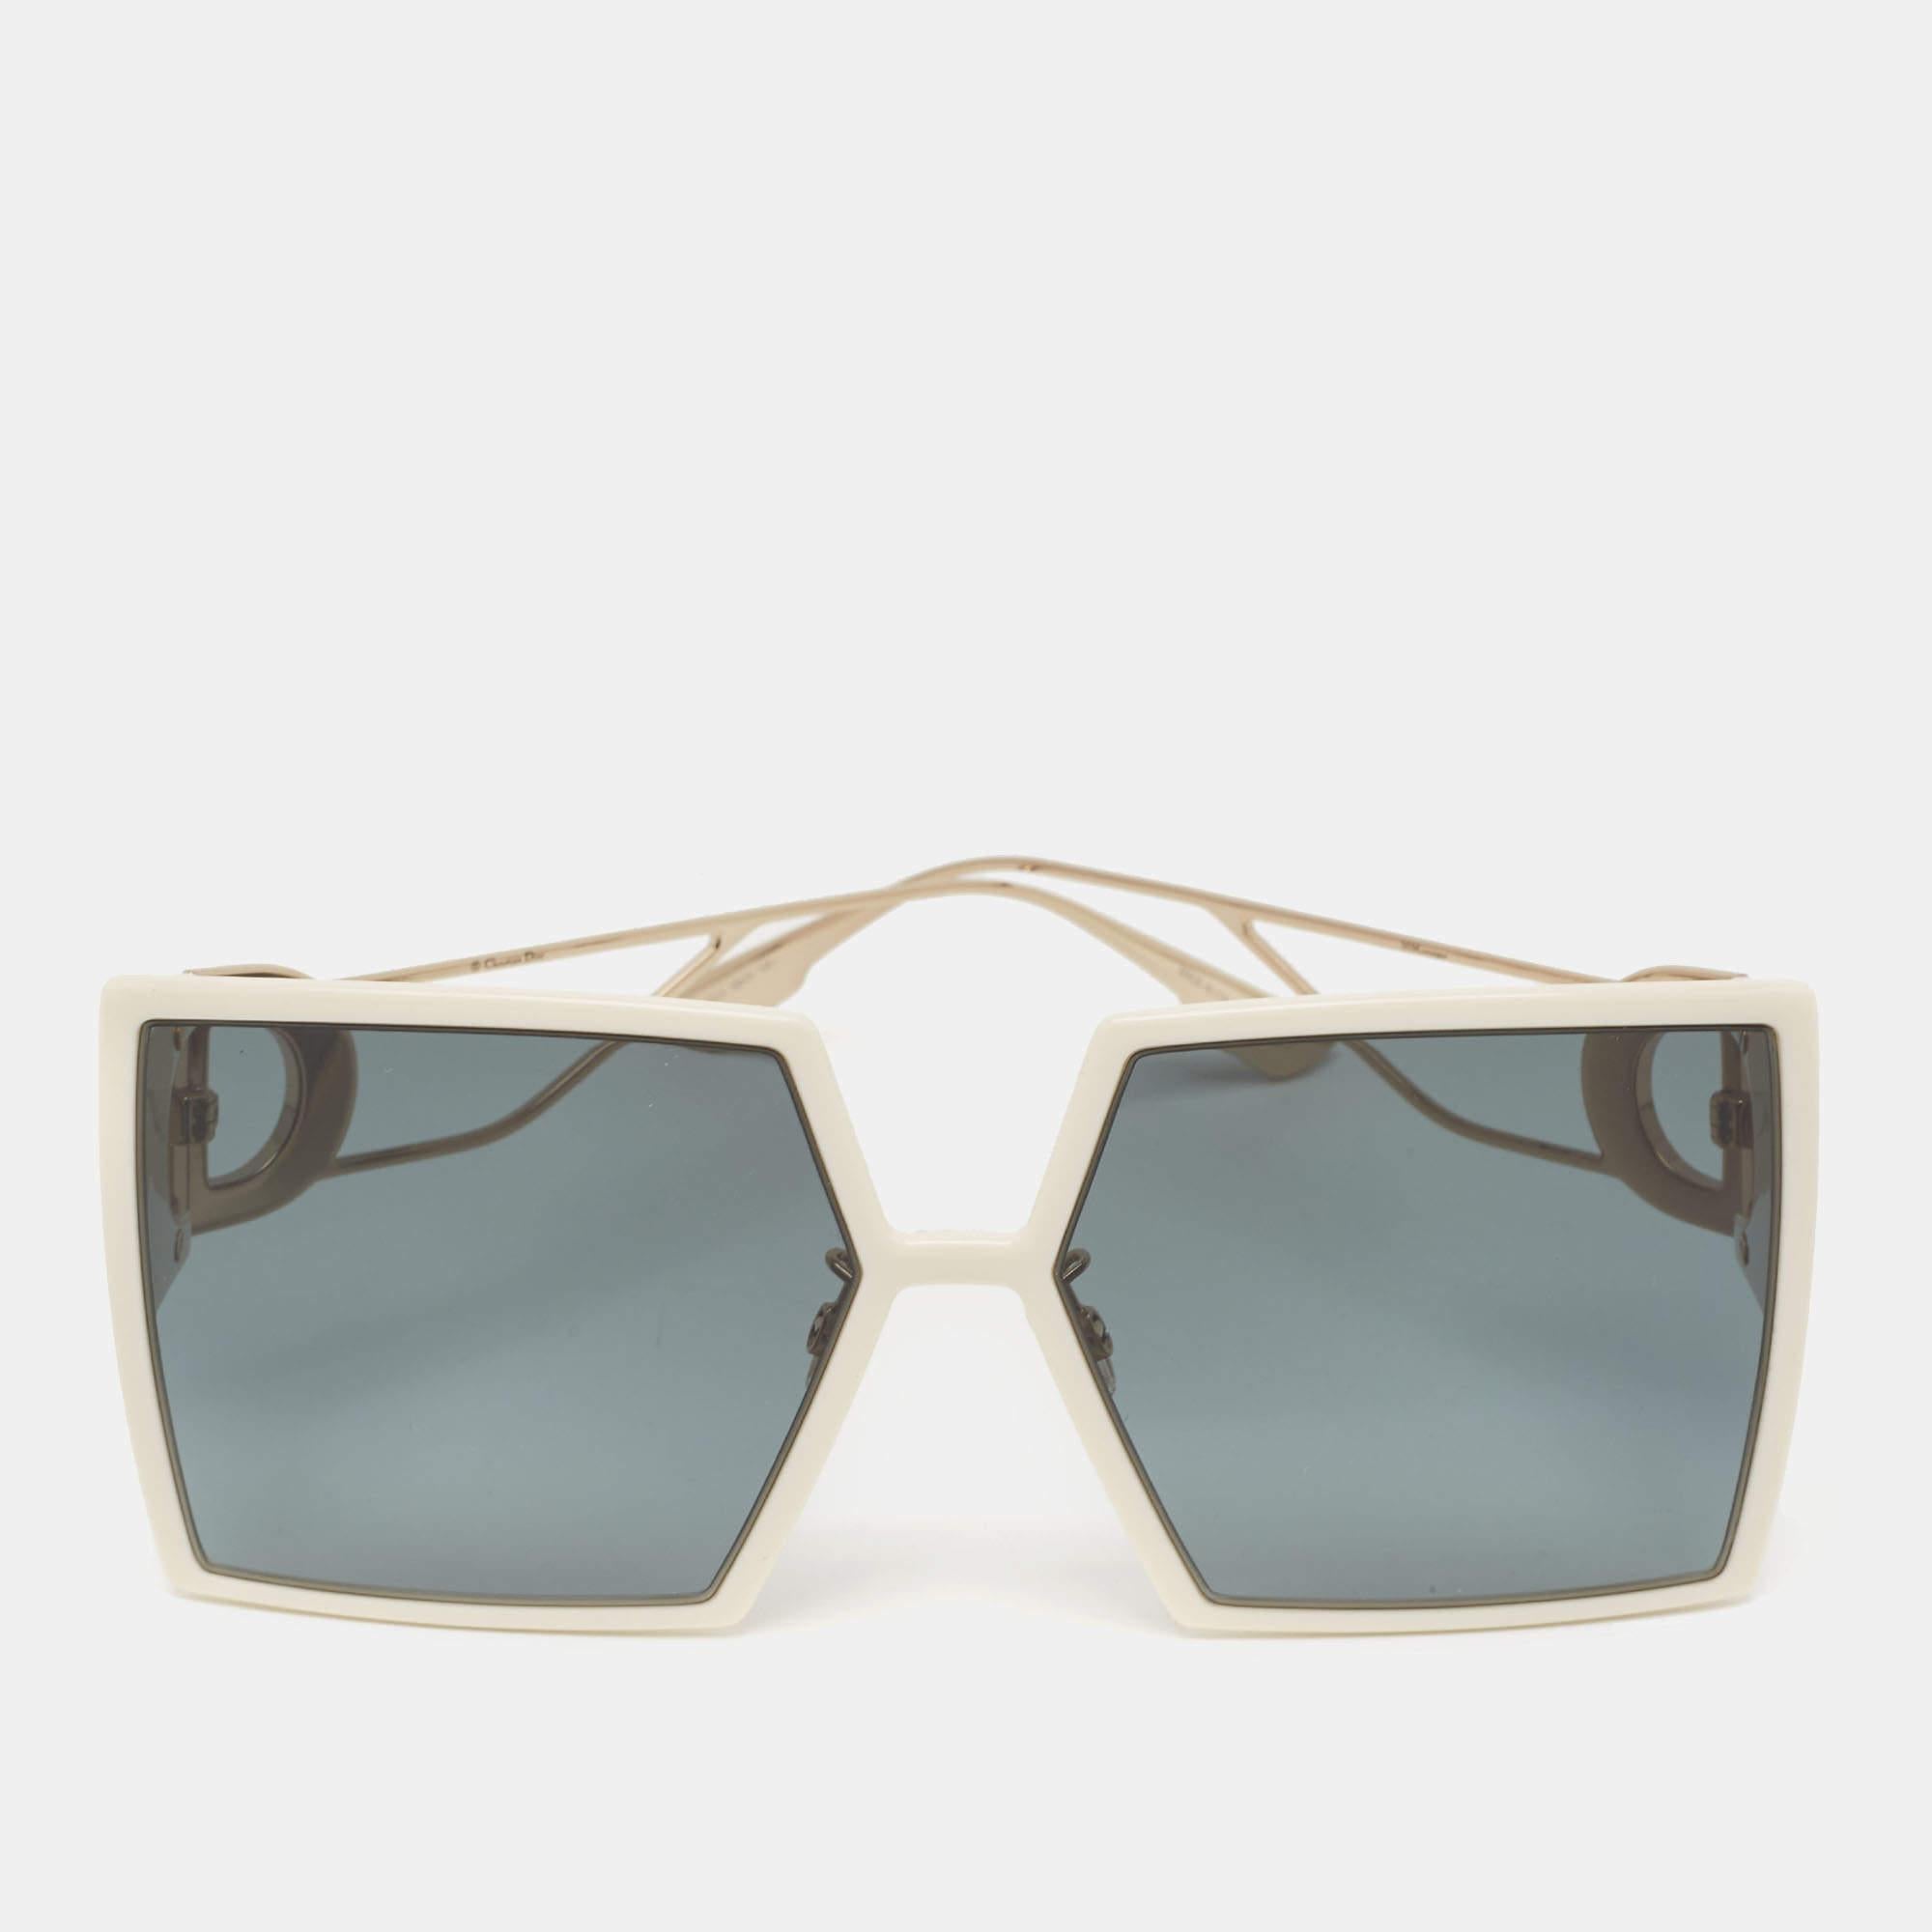 Embrace sunny days in full style with the help of this pair of Dior sunglasses. Created with expertise, the luxe sunglasses feature a well-designed frame and high-grade lenses that are equipped to protect your eyes.

Includes: Original Case